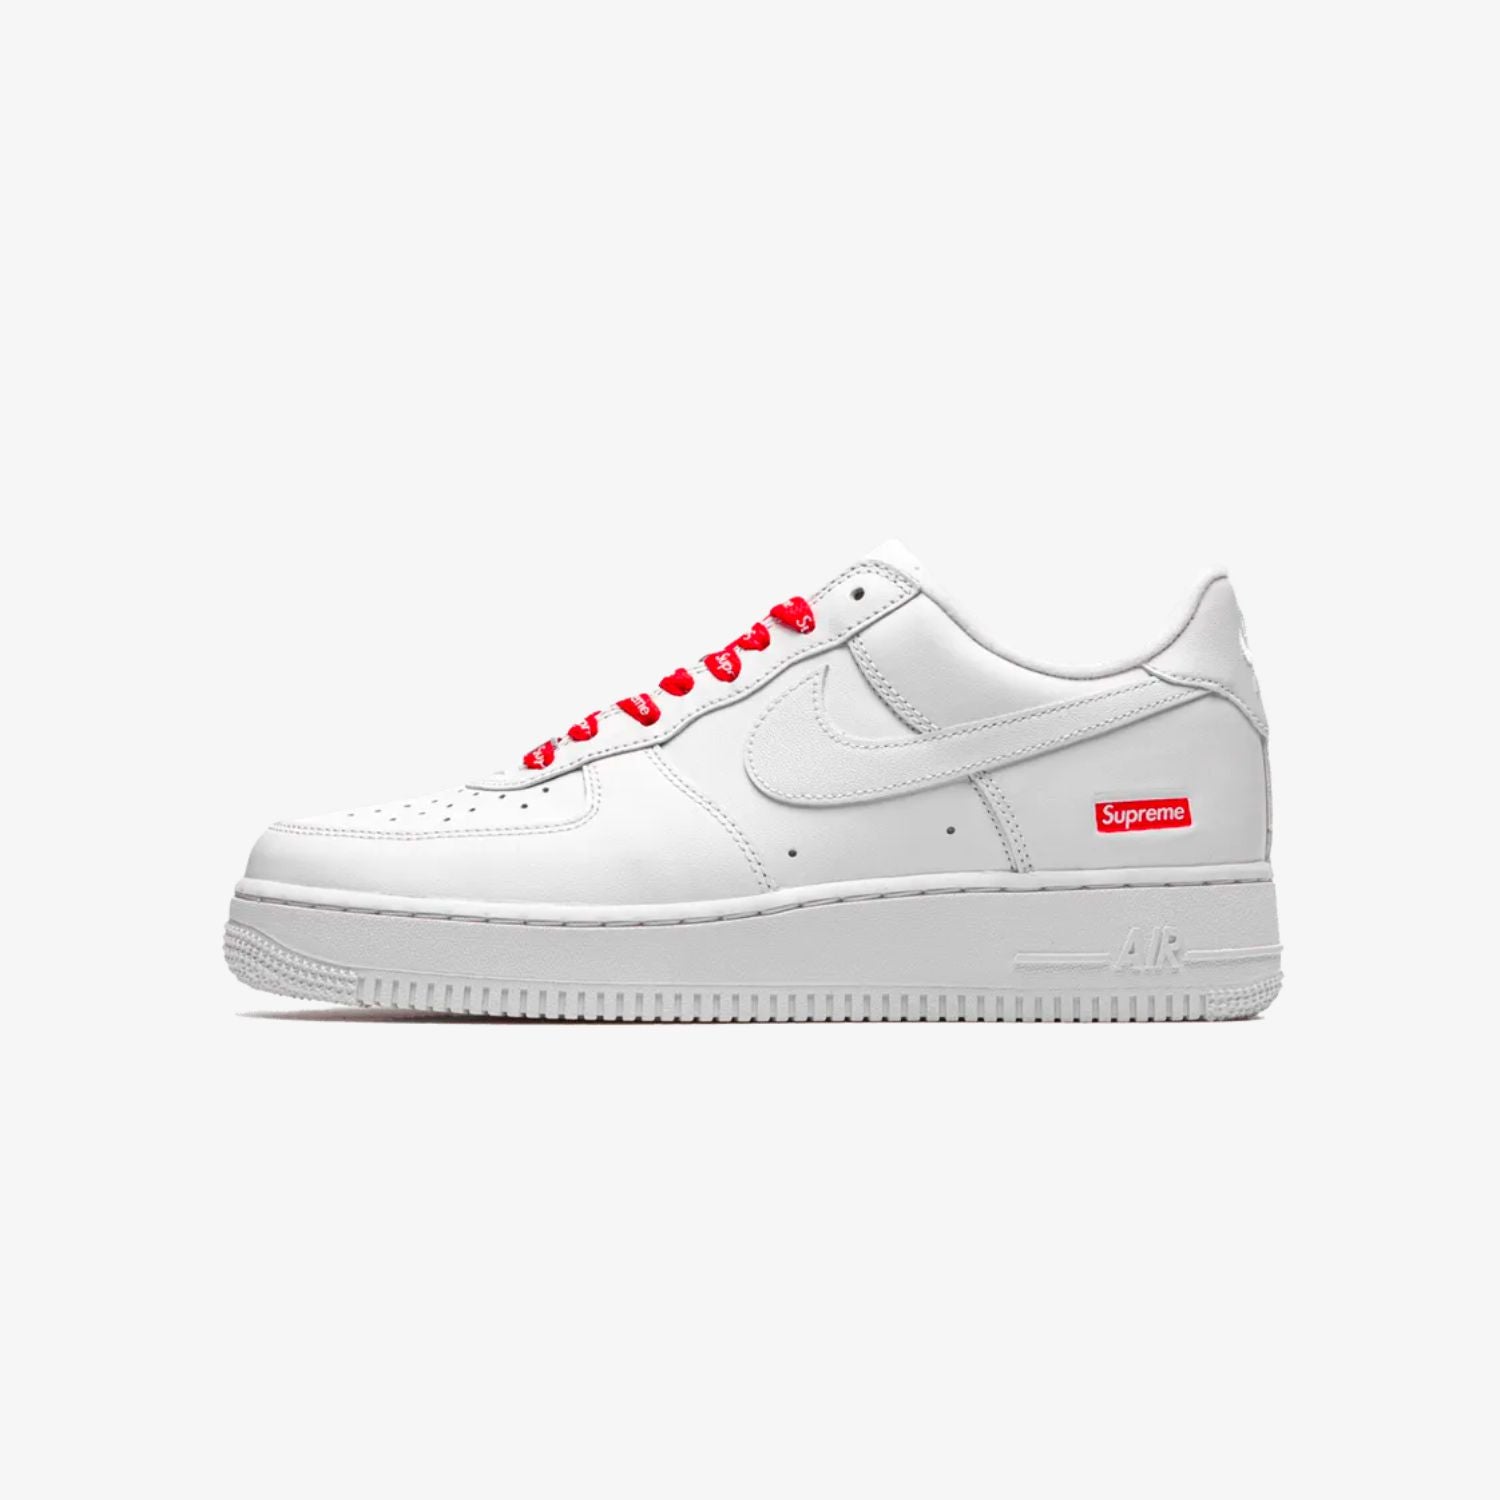 nike-air-force-1-low-supreme-white-unfazed-1